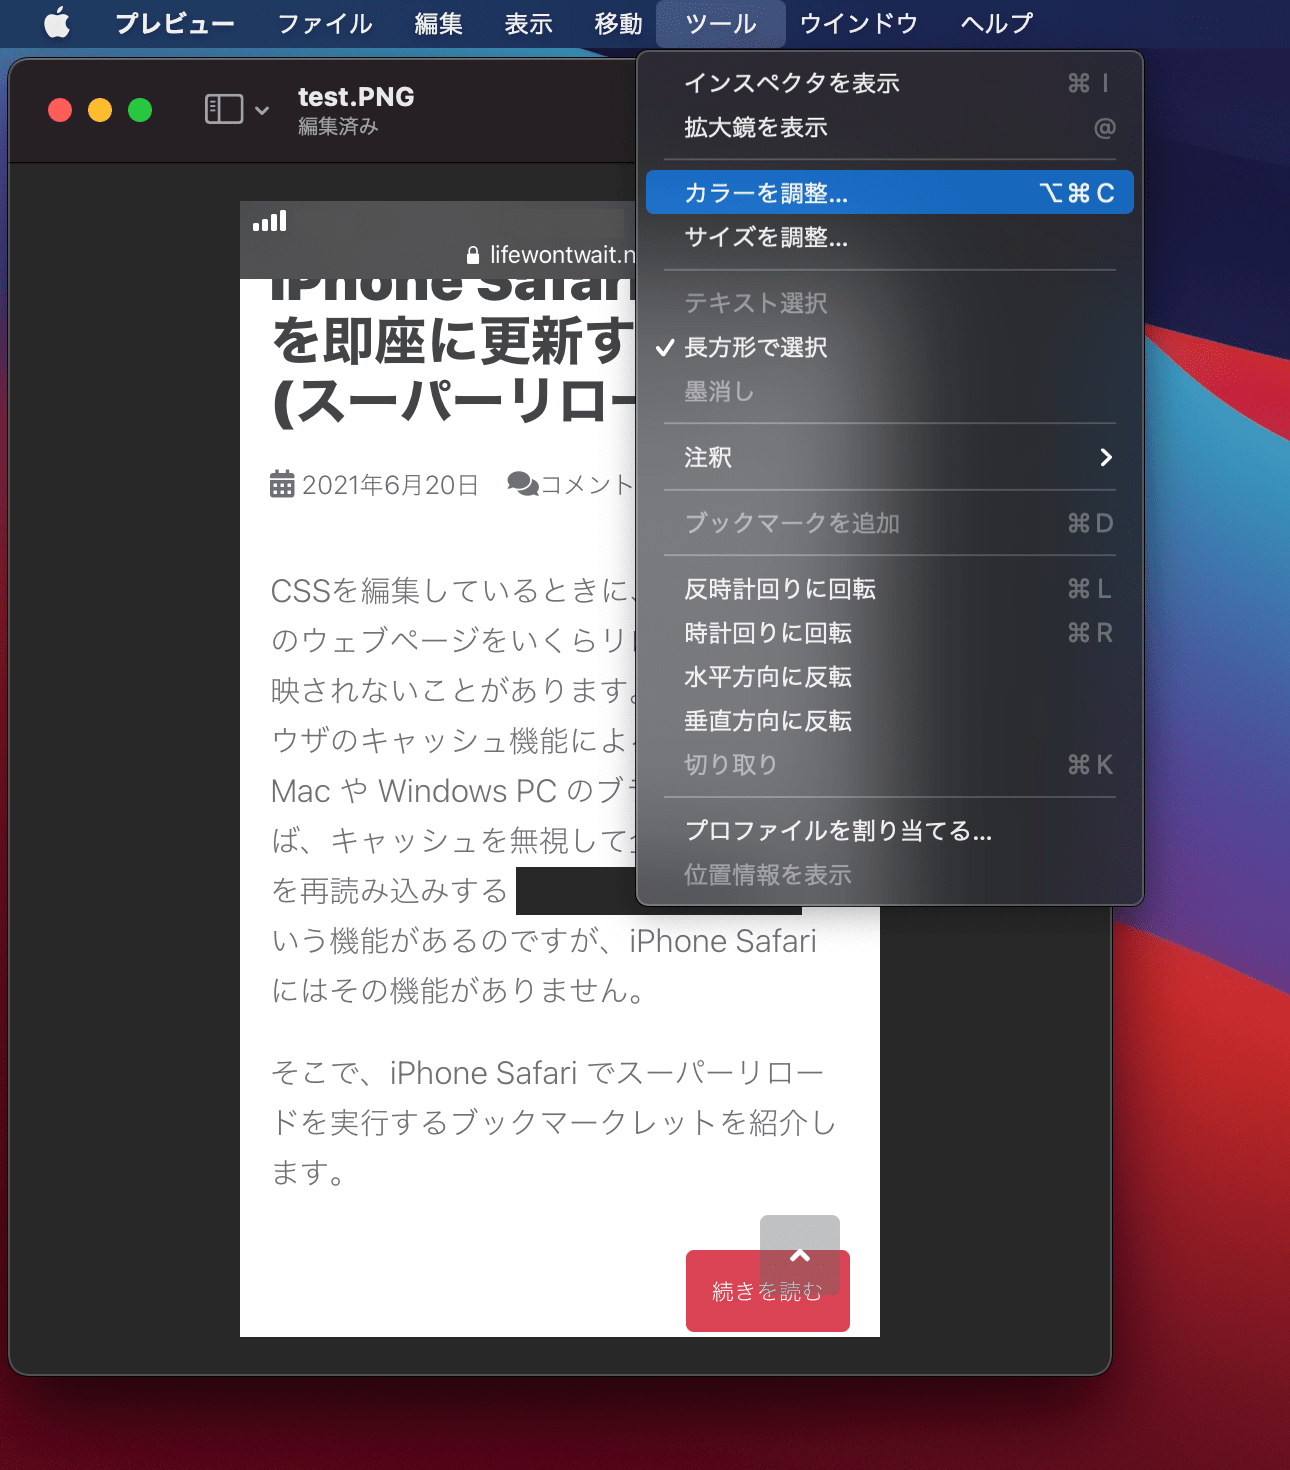 highlight-part-of-an-image-in-the-mac-preview-app_03